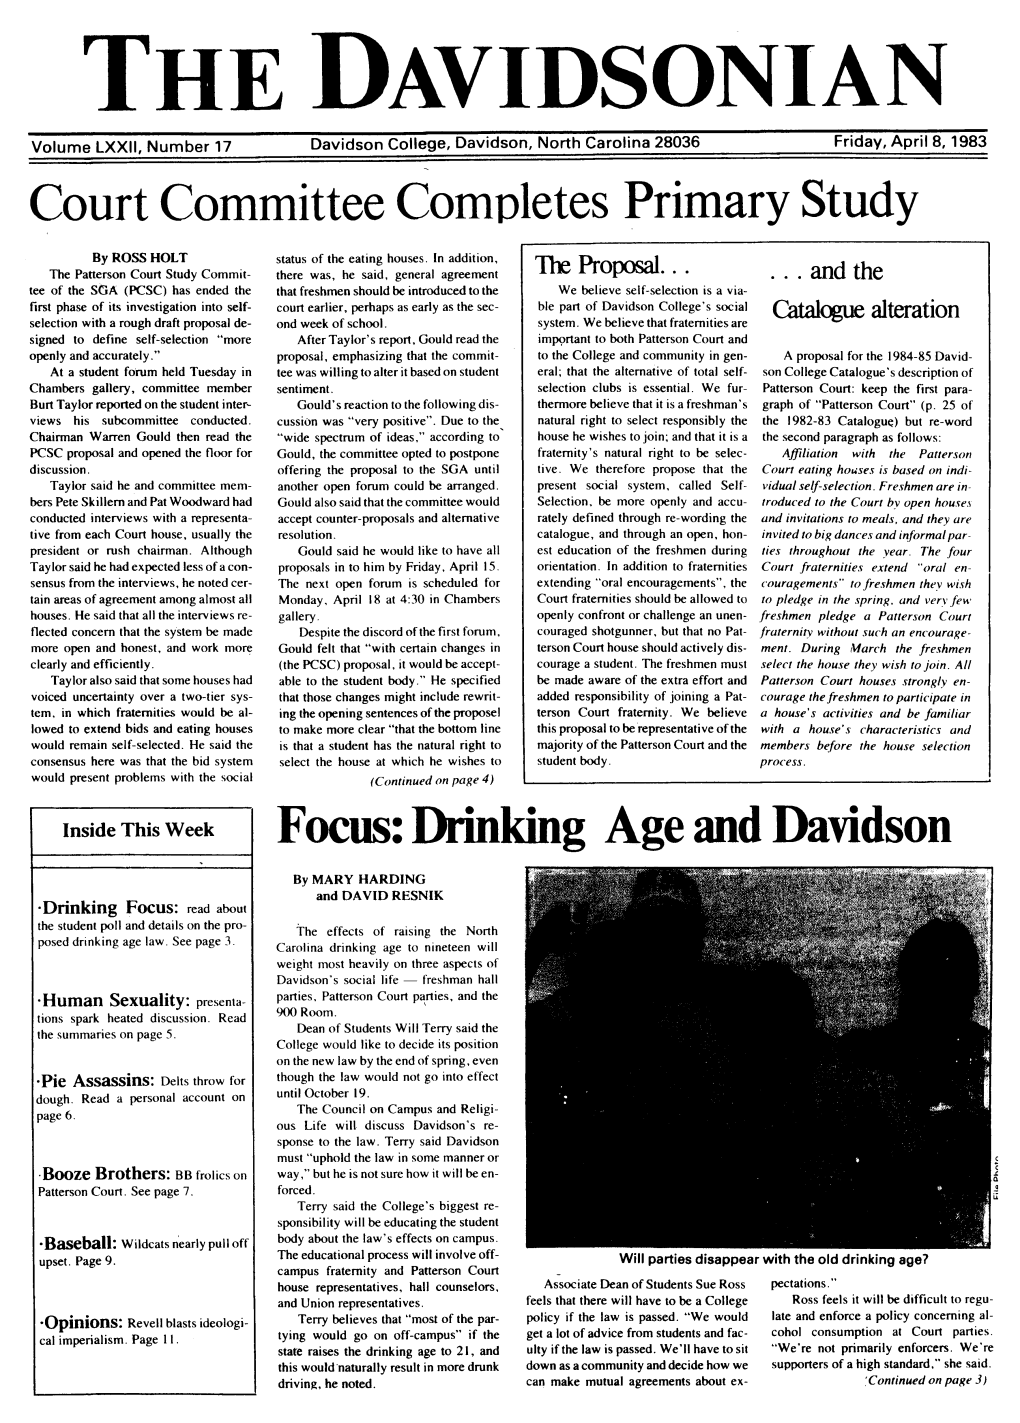 April 8,1983 Court Committee Completes Primary Study